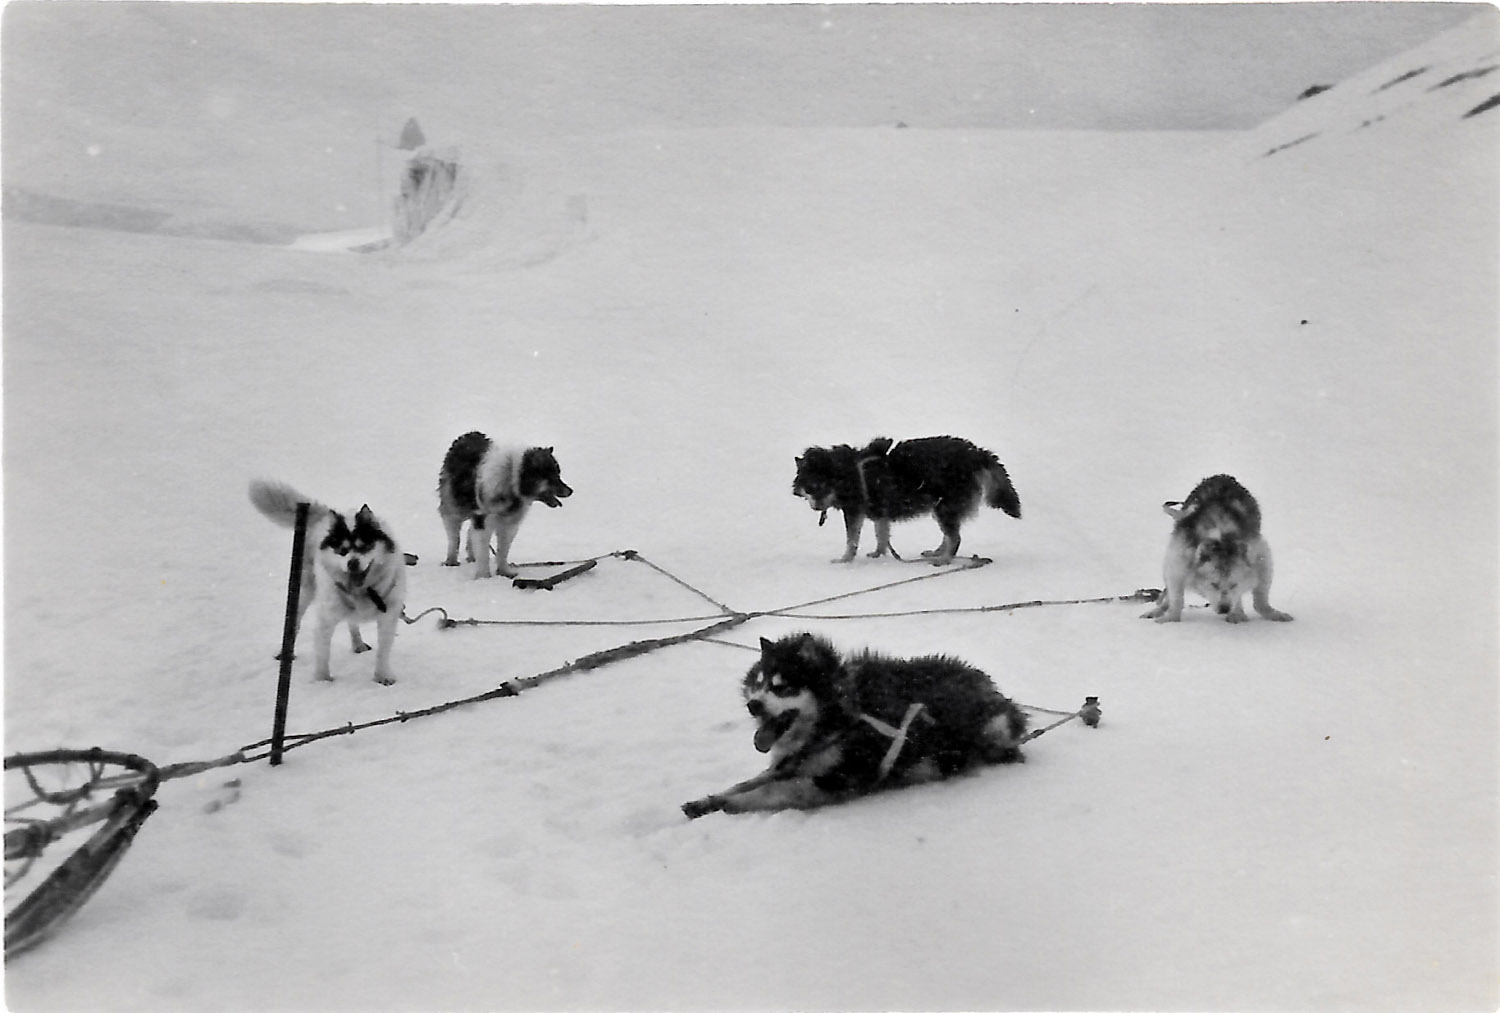 Taking dogs to Camp Glacier to measure the bay ice thickness - 4 ft 9 inches! Oct 1950